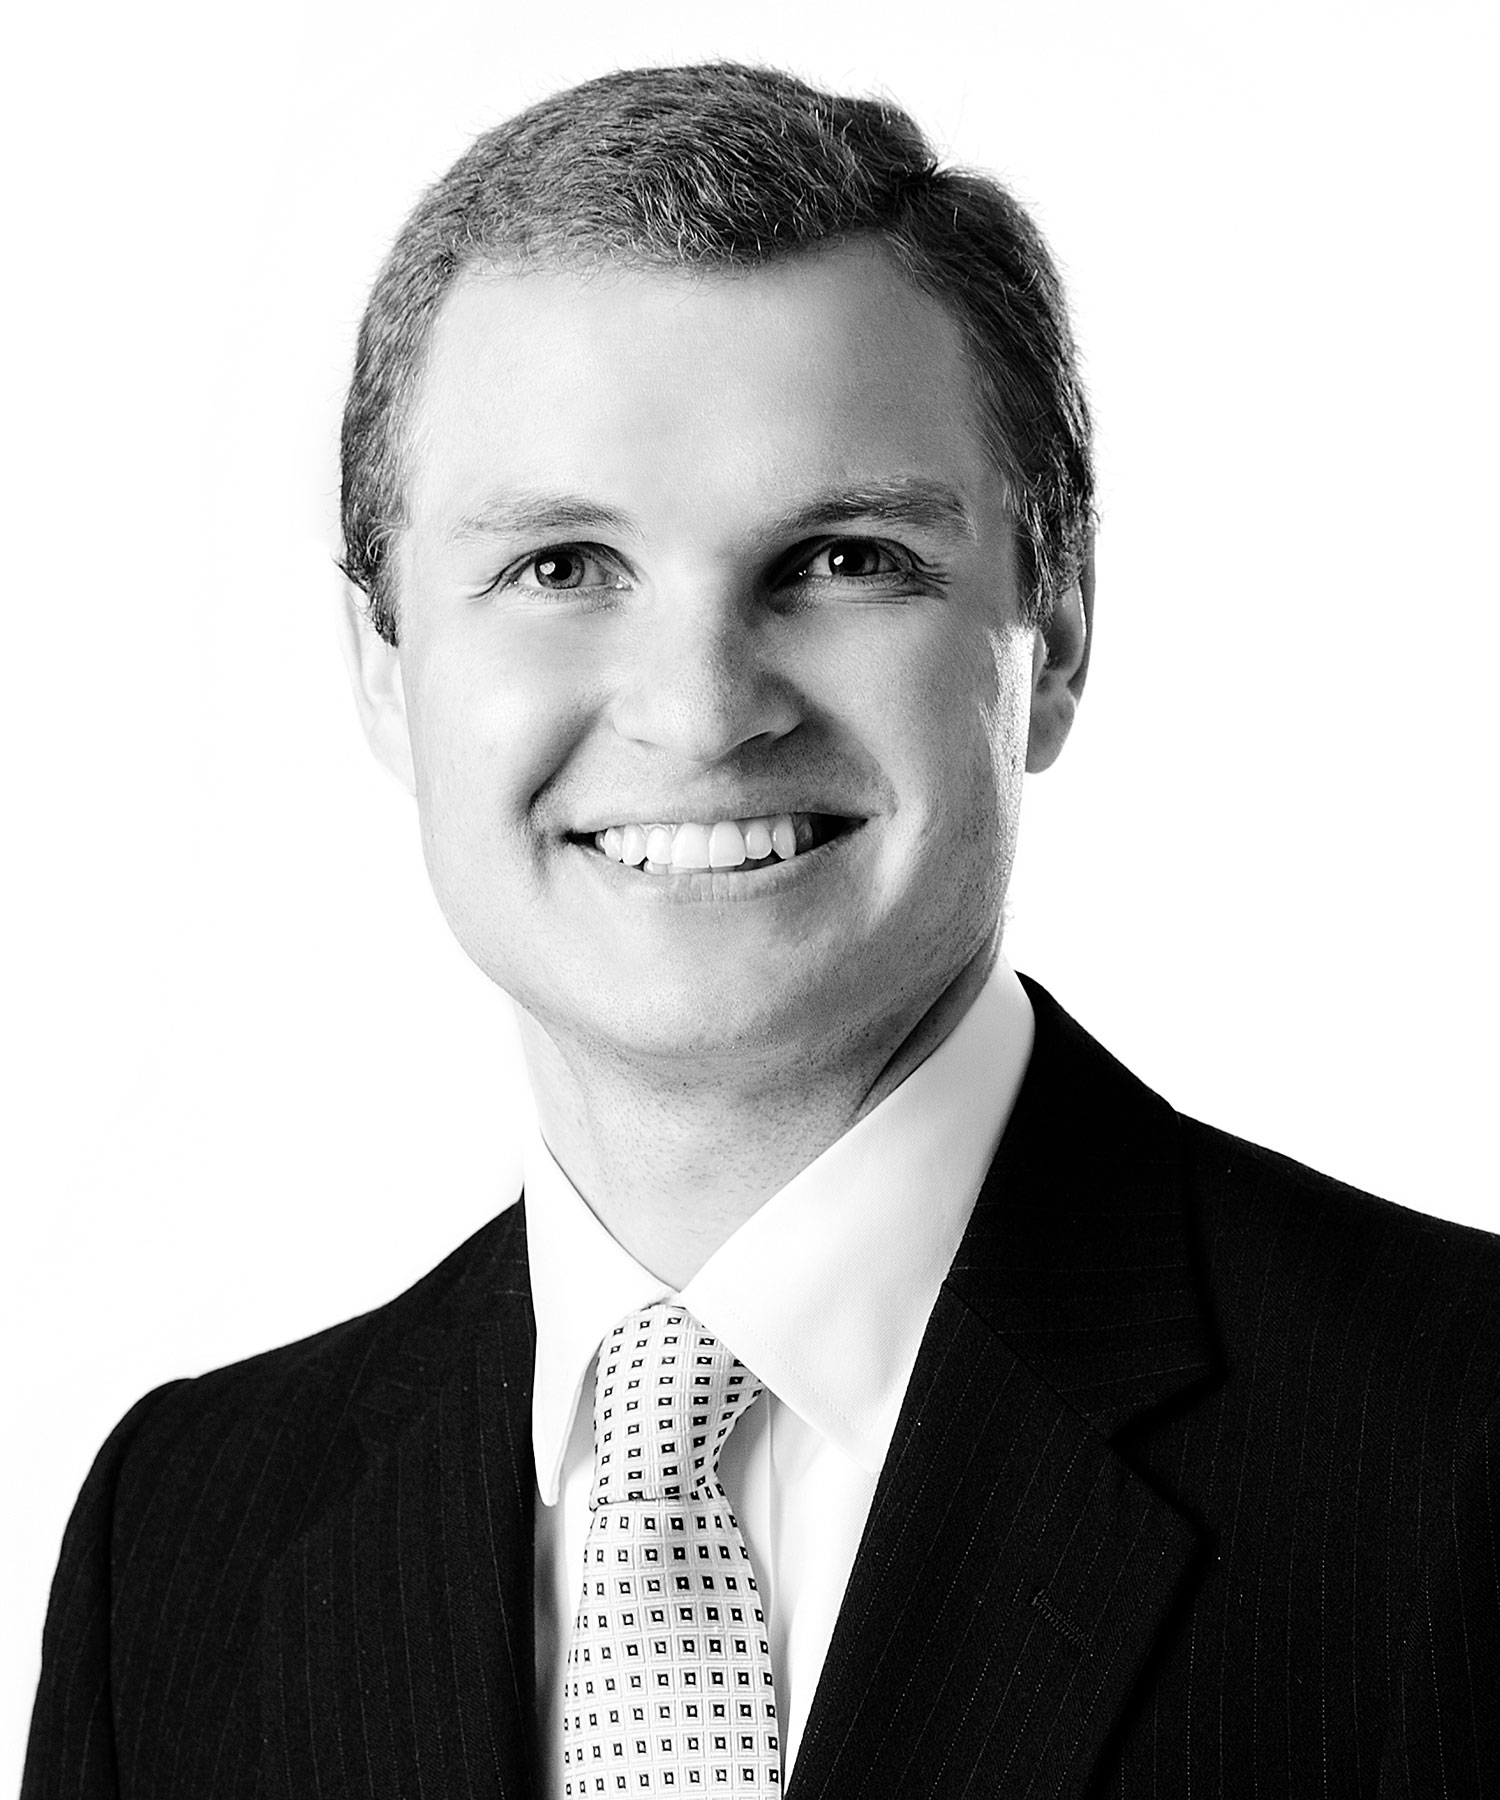 Brandon Baker, CPA, Senior Wealth Manager at Sage Financial Group. Headshot photograph of Brandon Baker, CPA smiling and looking directly at the camera, wearing professional attire.